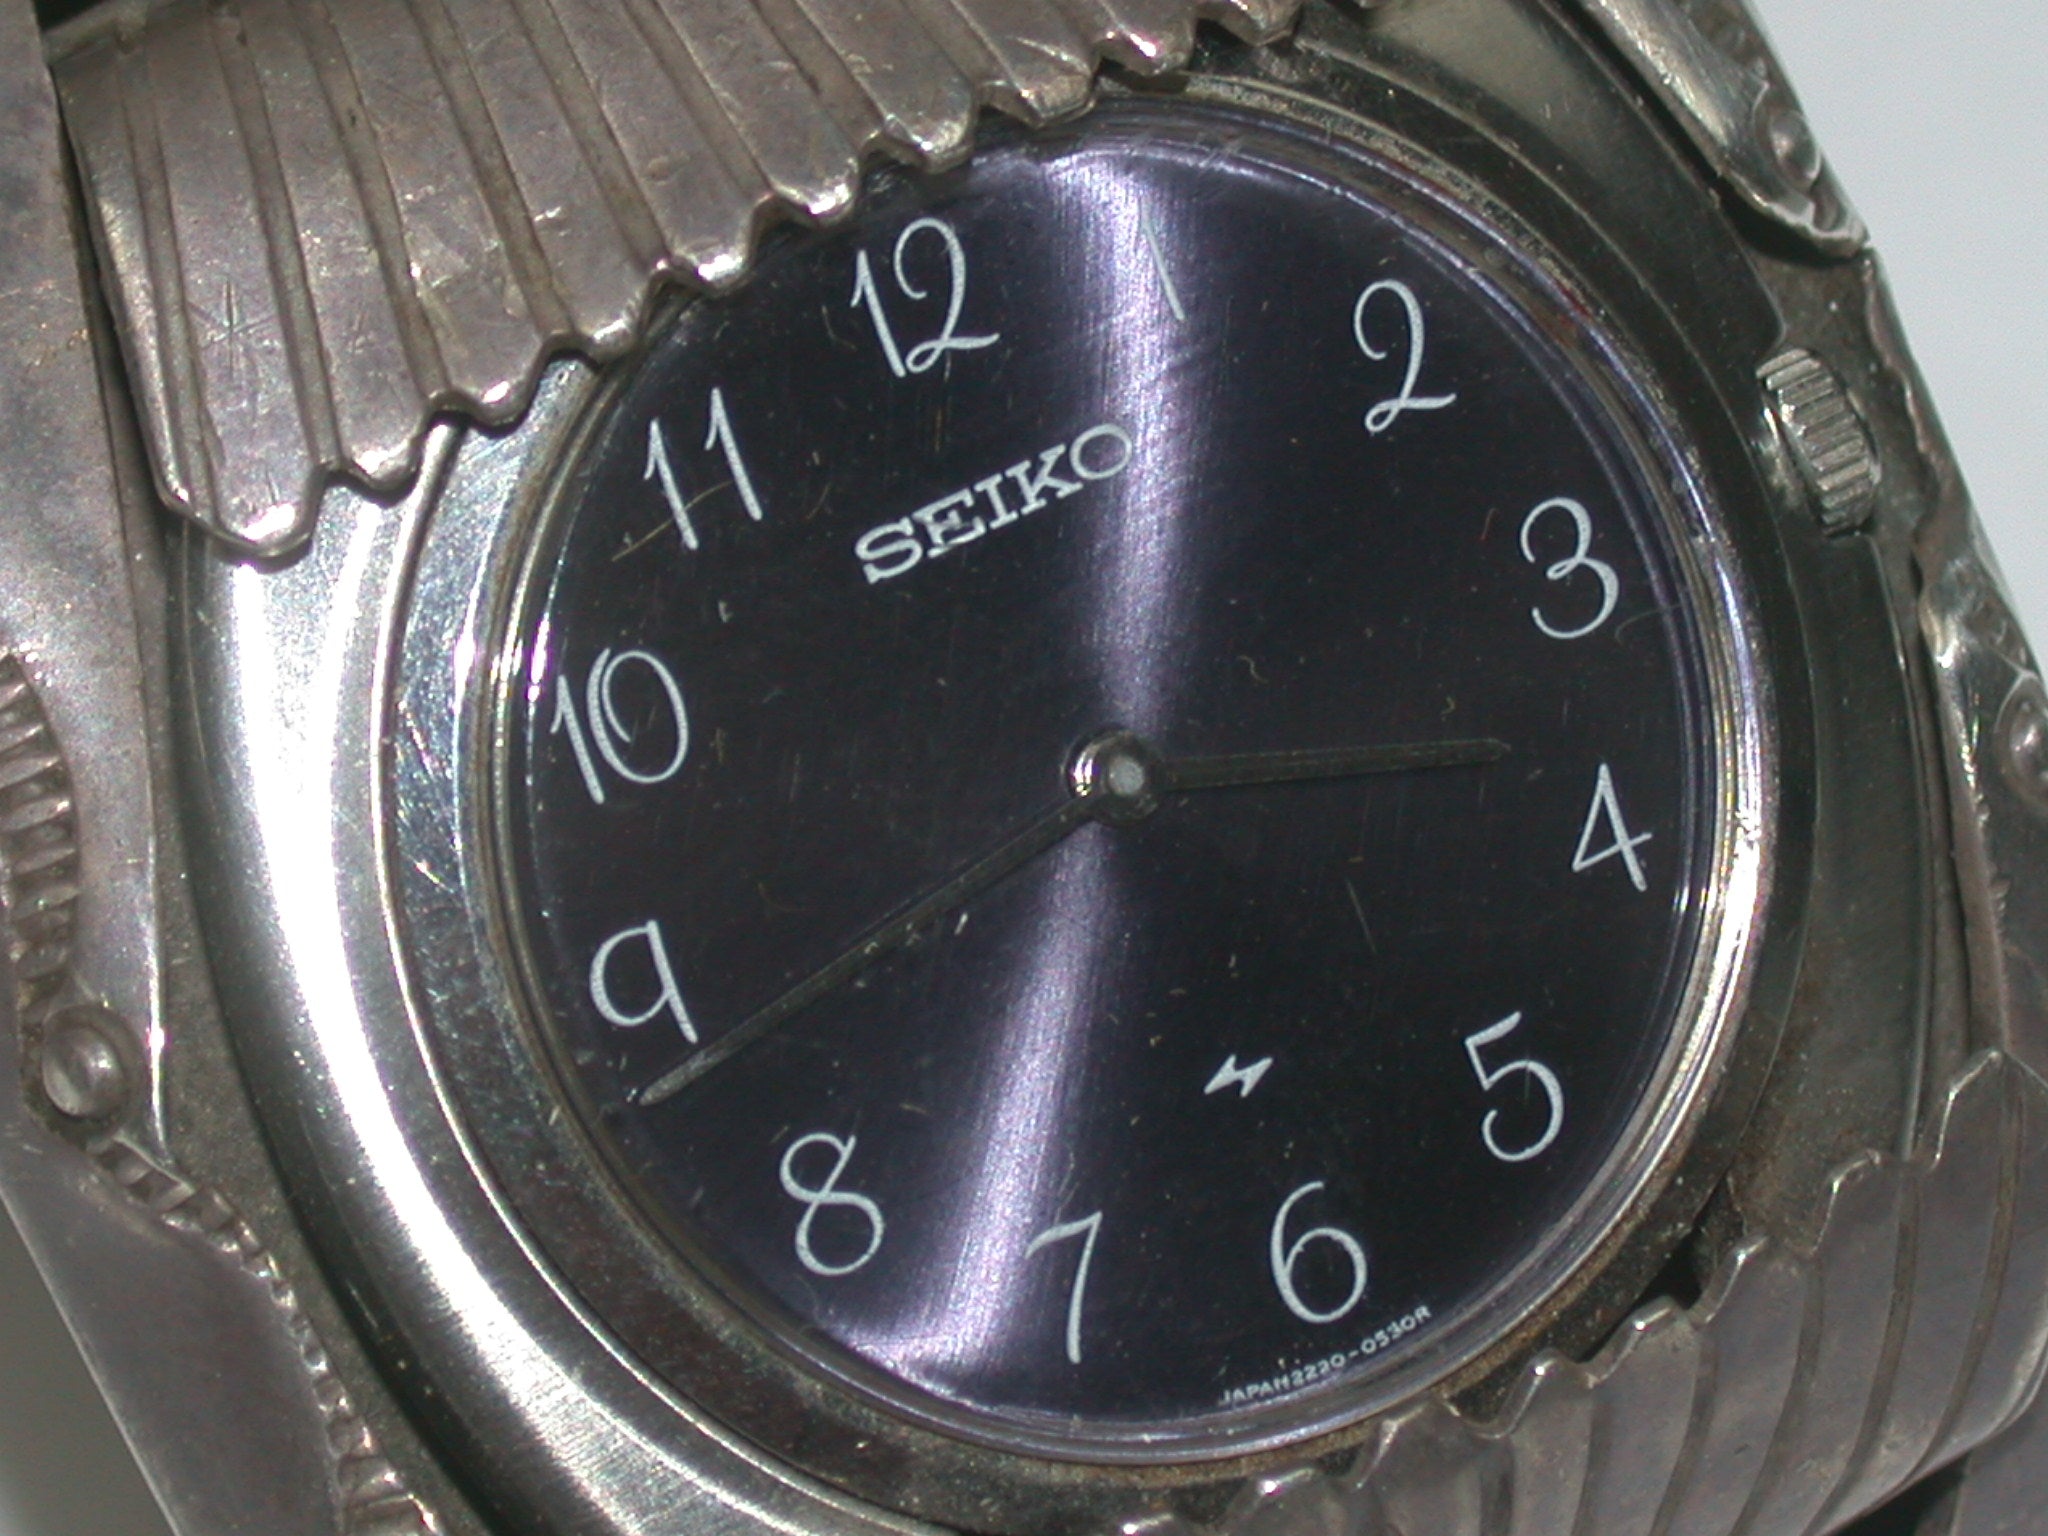 Benny & Co Diamond Watch 19247: buy online in NYC. Best price at TRAXNYC.